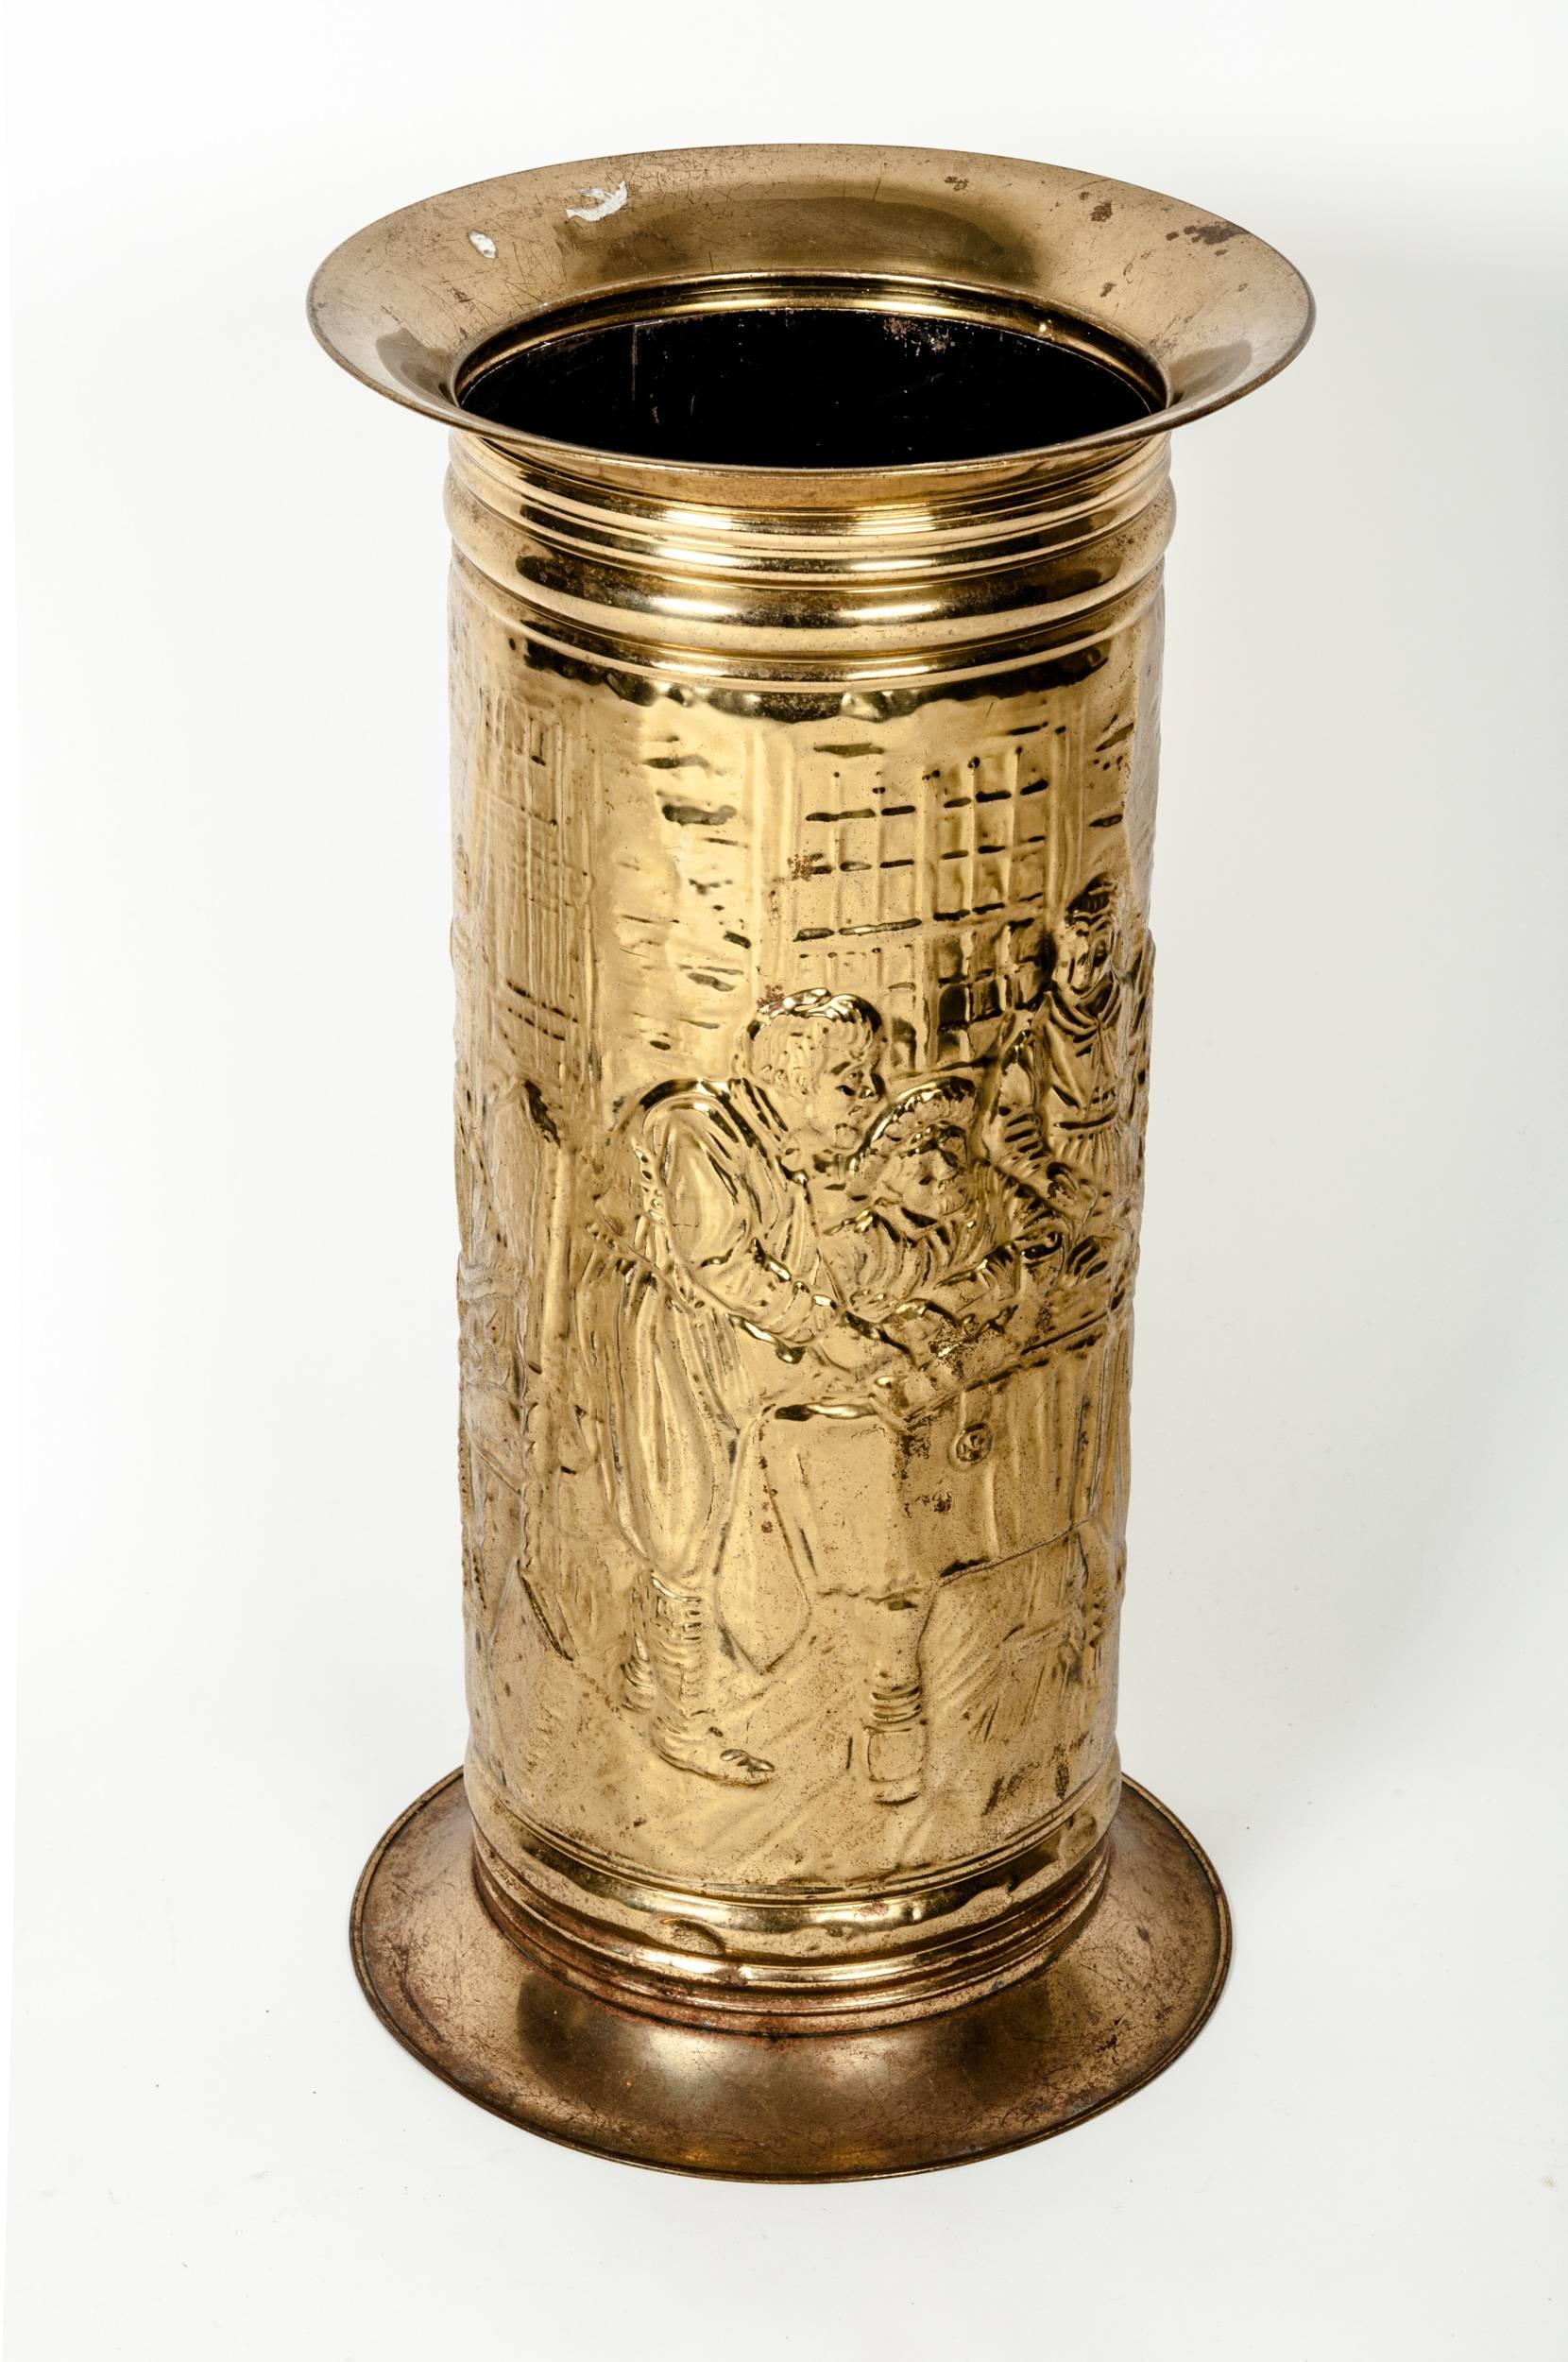 Vintage brass umbrella stand. This one is intricately embossed with a wonderfully detailed medieval scene.